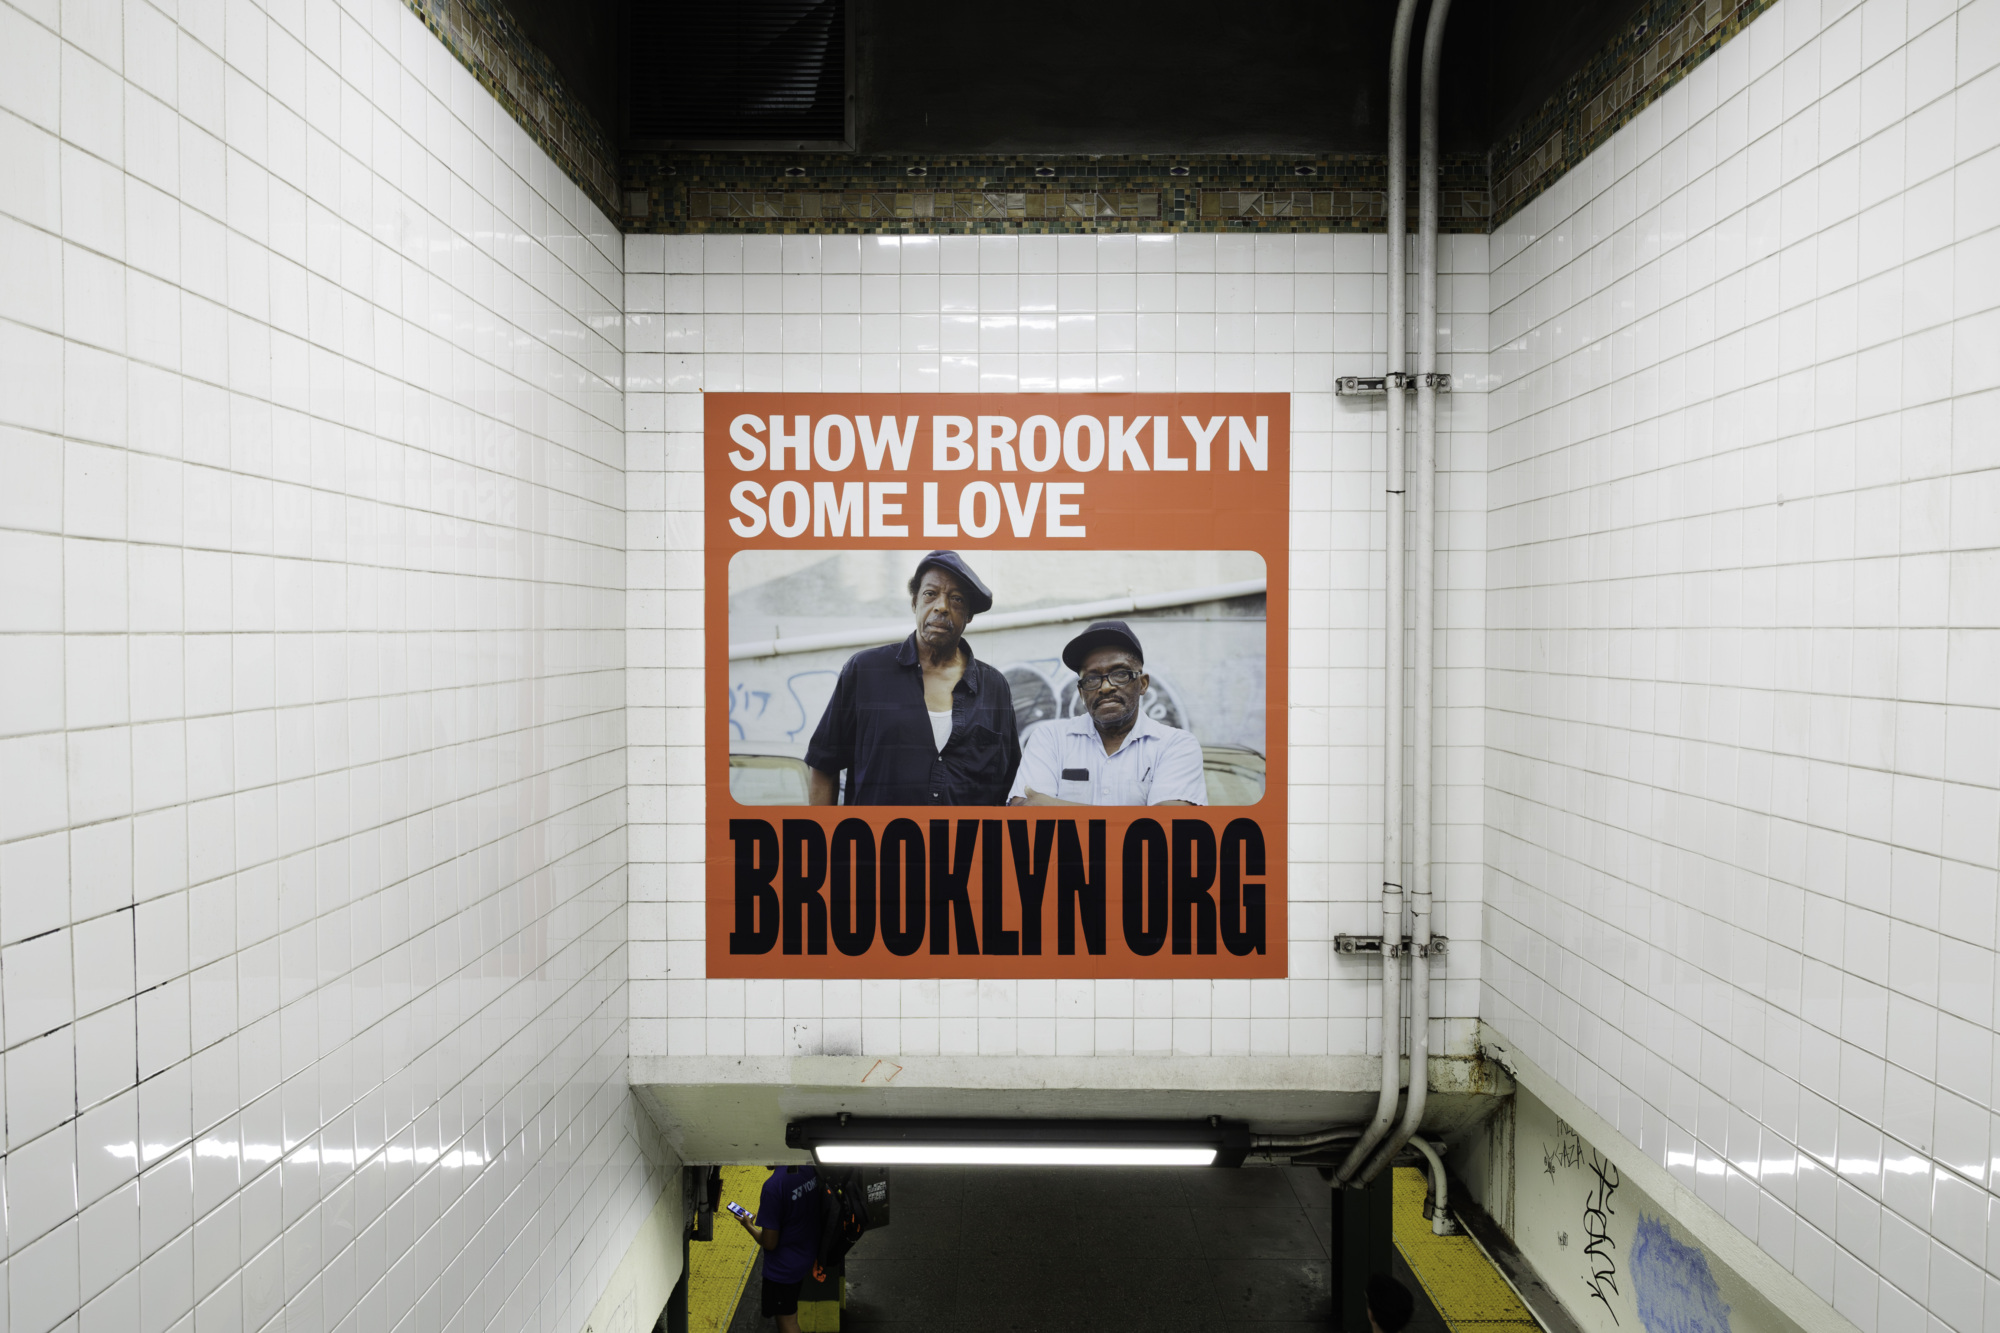 A wall poster in a subway station features two men and reads, "SHOW BROOKLYN SOME LOVE" with "GIVE TO BROOKLYN.ORG" at the bottom. The walls are tiled with a white grid pattern.